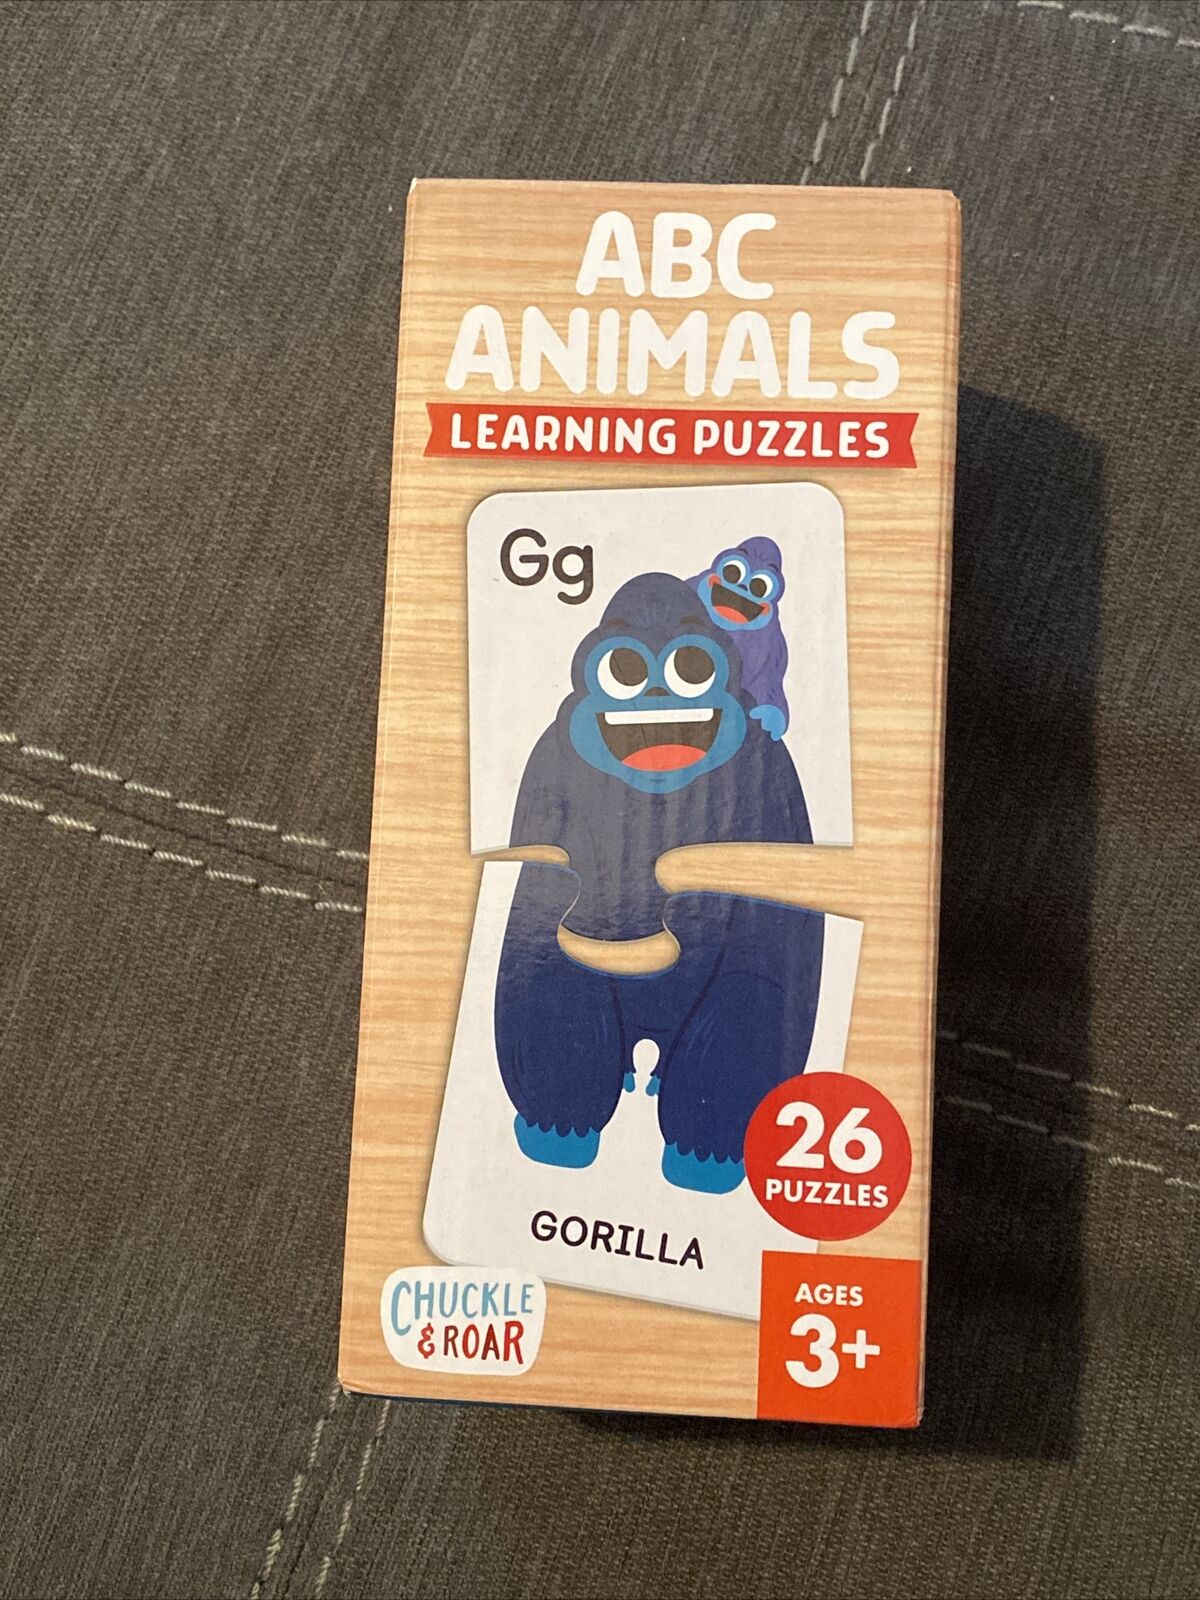 Chuckle & Roar ABC Animals Learning Puzzles